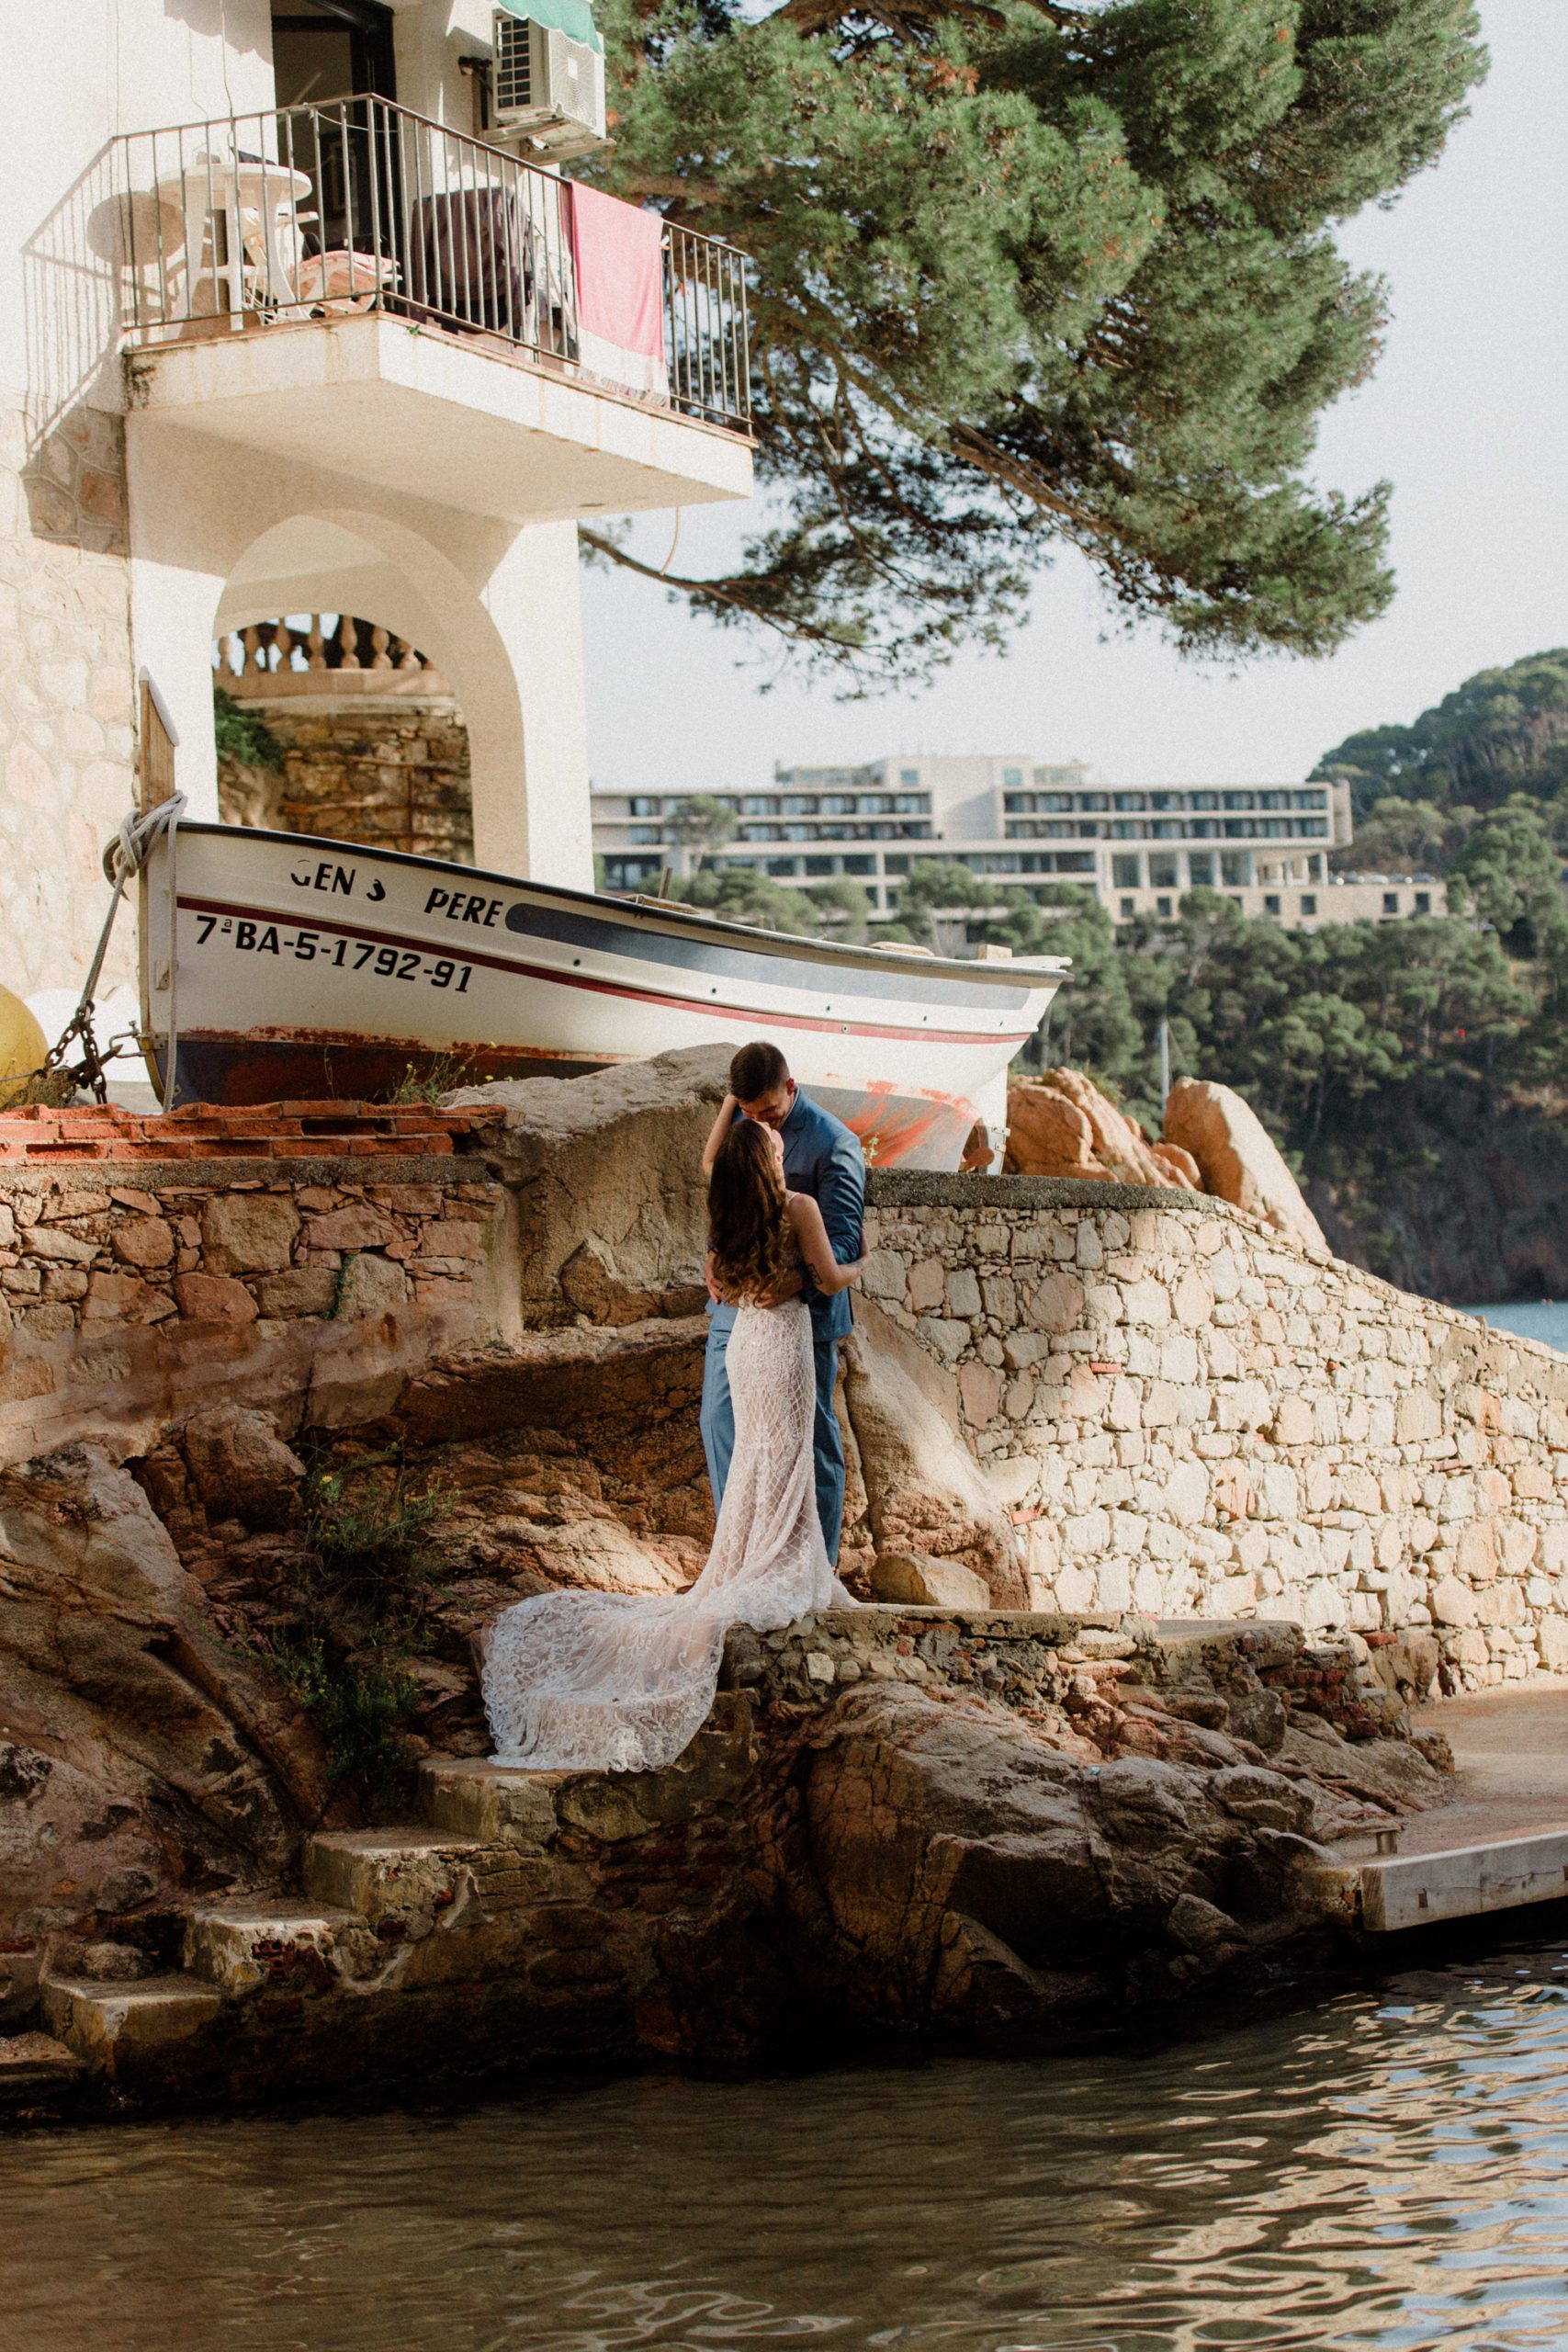  This Costa Brava 2 day Elopement couple spent two days exploring the area and saying vows in the cove of Cala d' Aigua Xelida, Spain. 